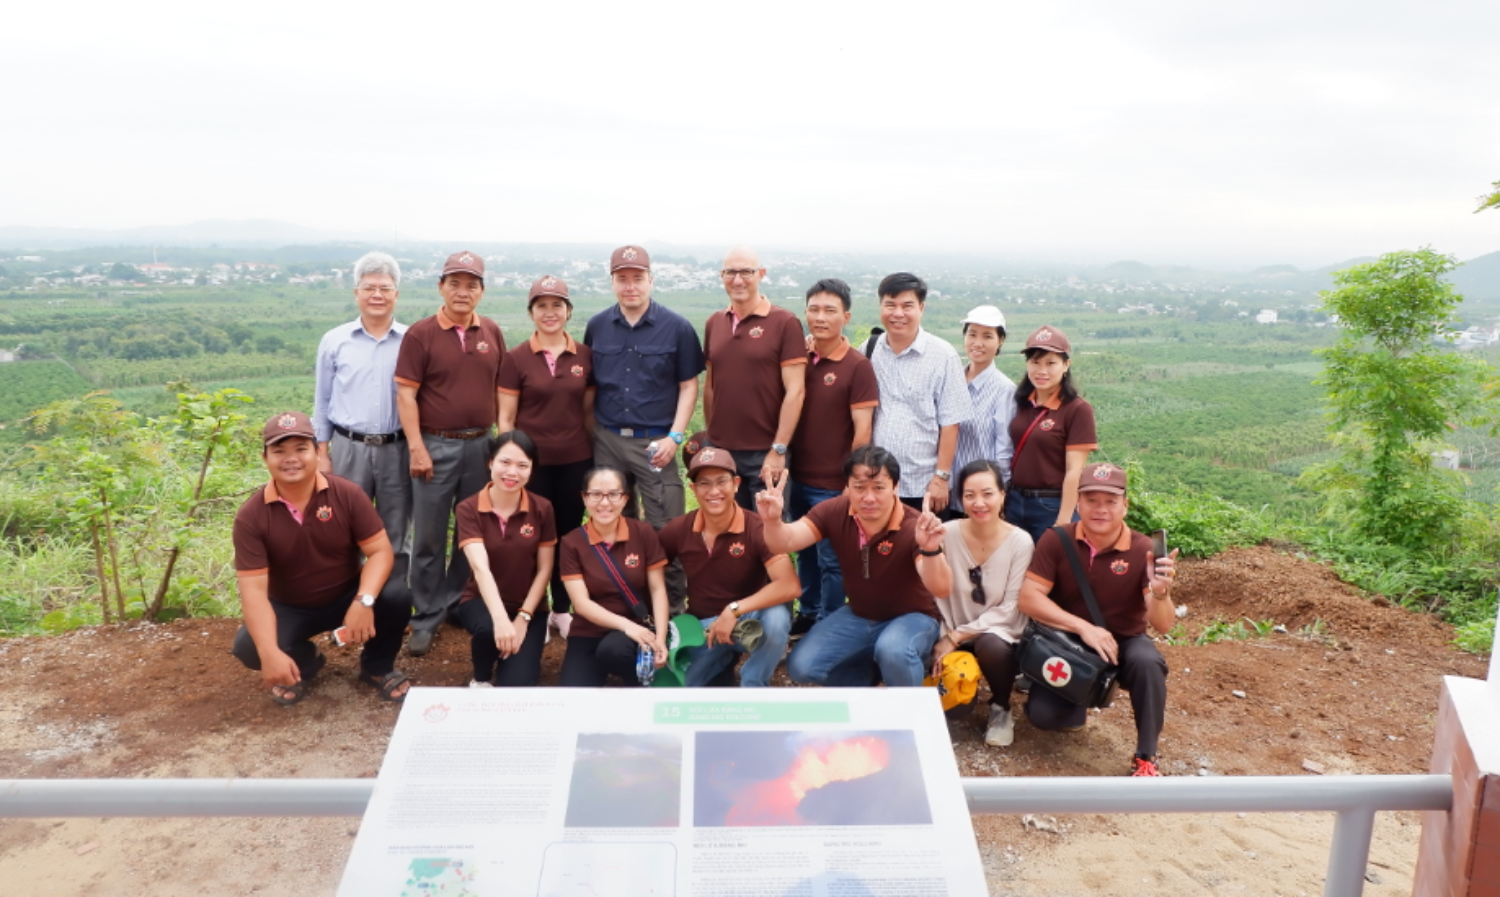 Activities of Evaluators in the 03 experience routes of Dak Nong geopark.